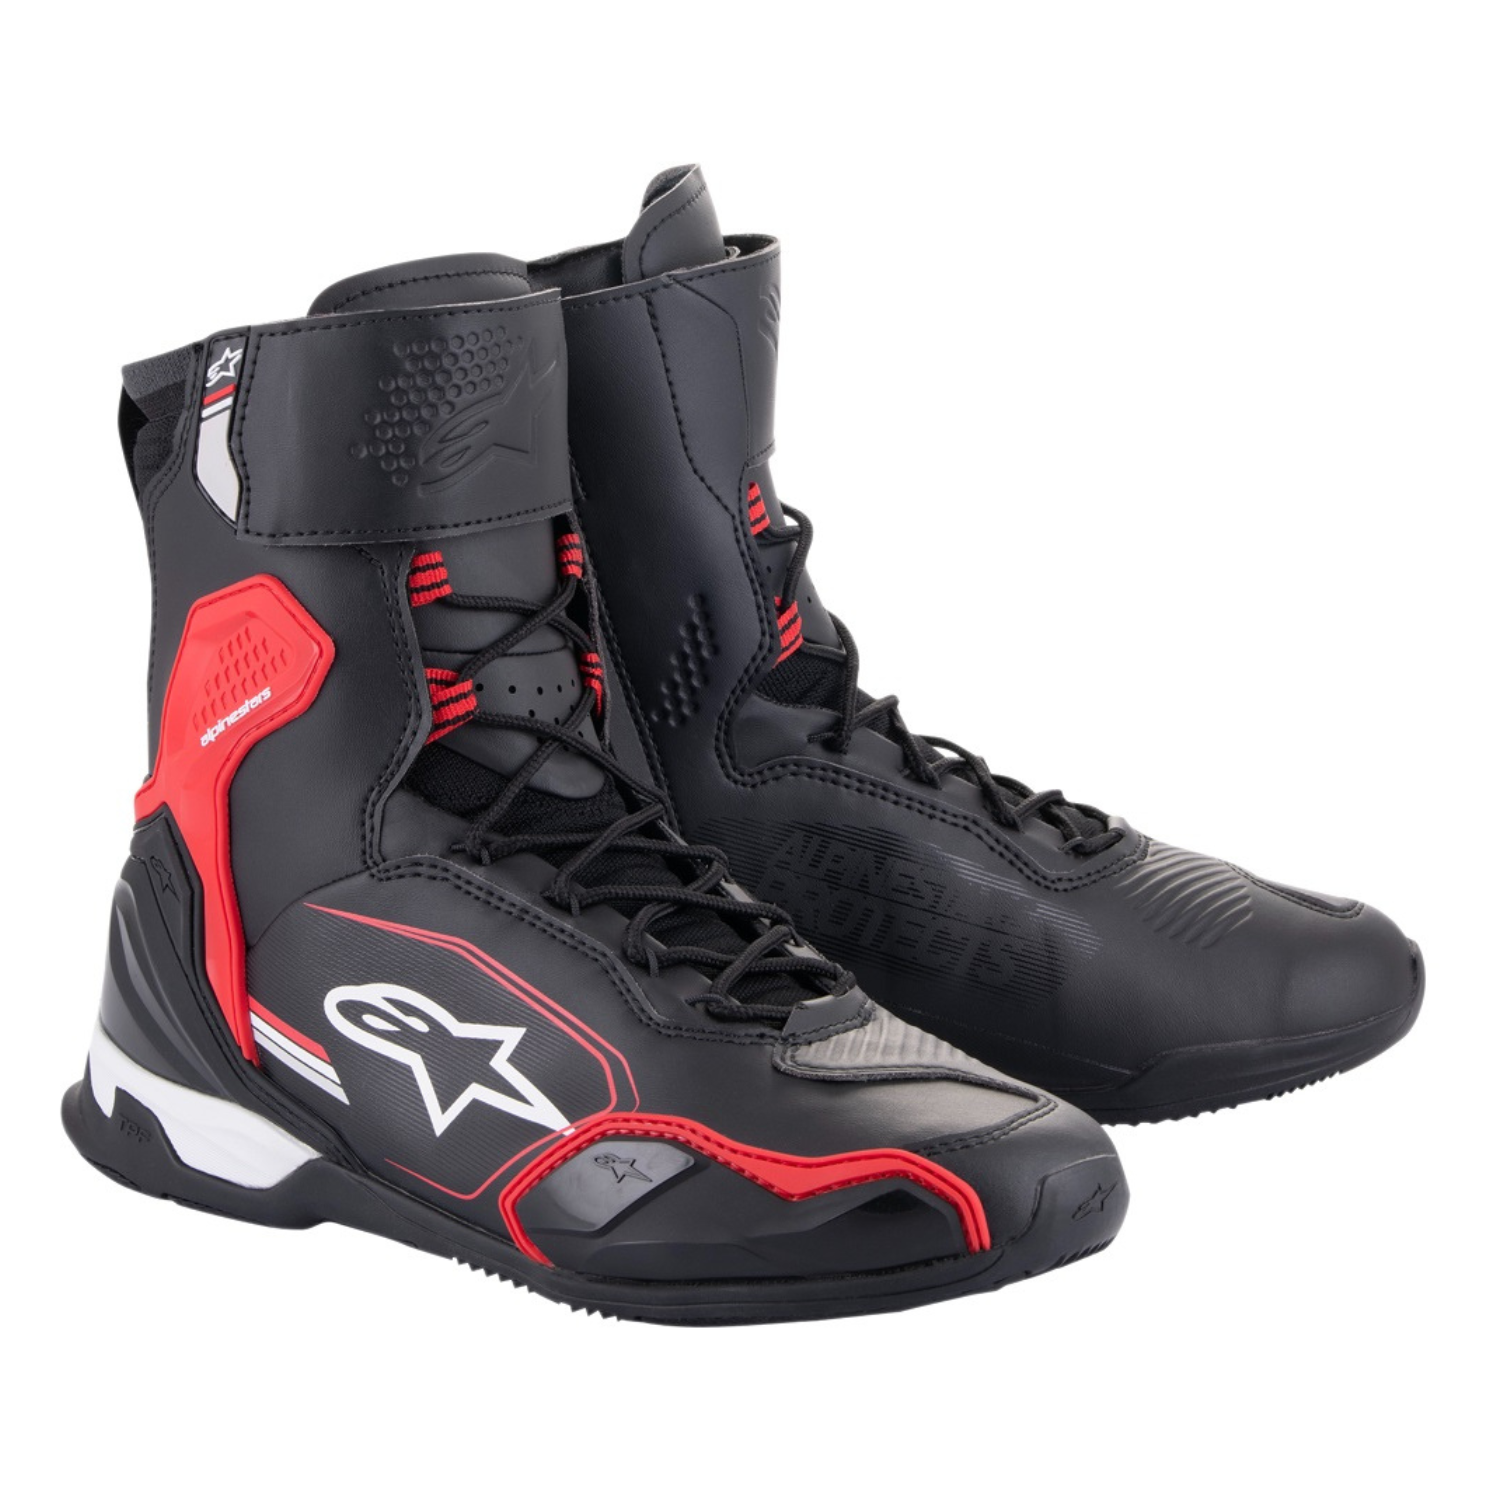 Image of EU Alpinestars Superfaster Shoes Black Bright Red White Taille US 7